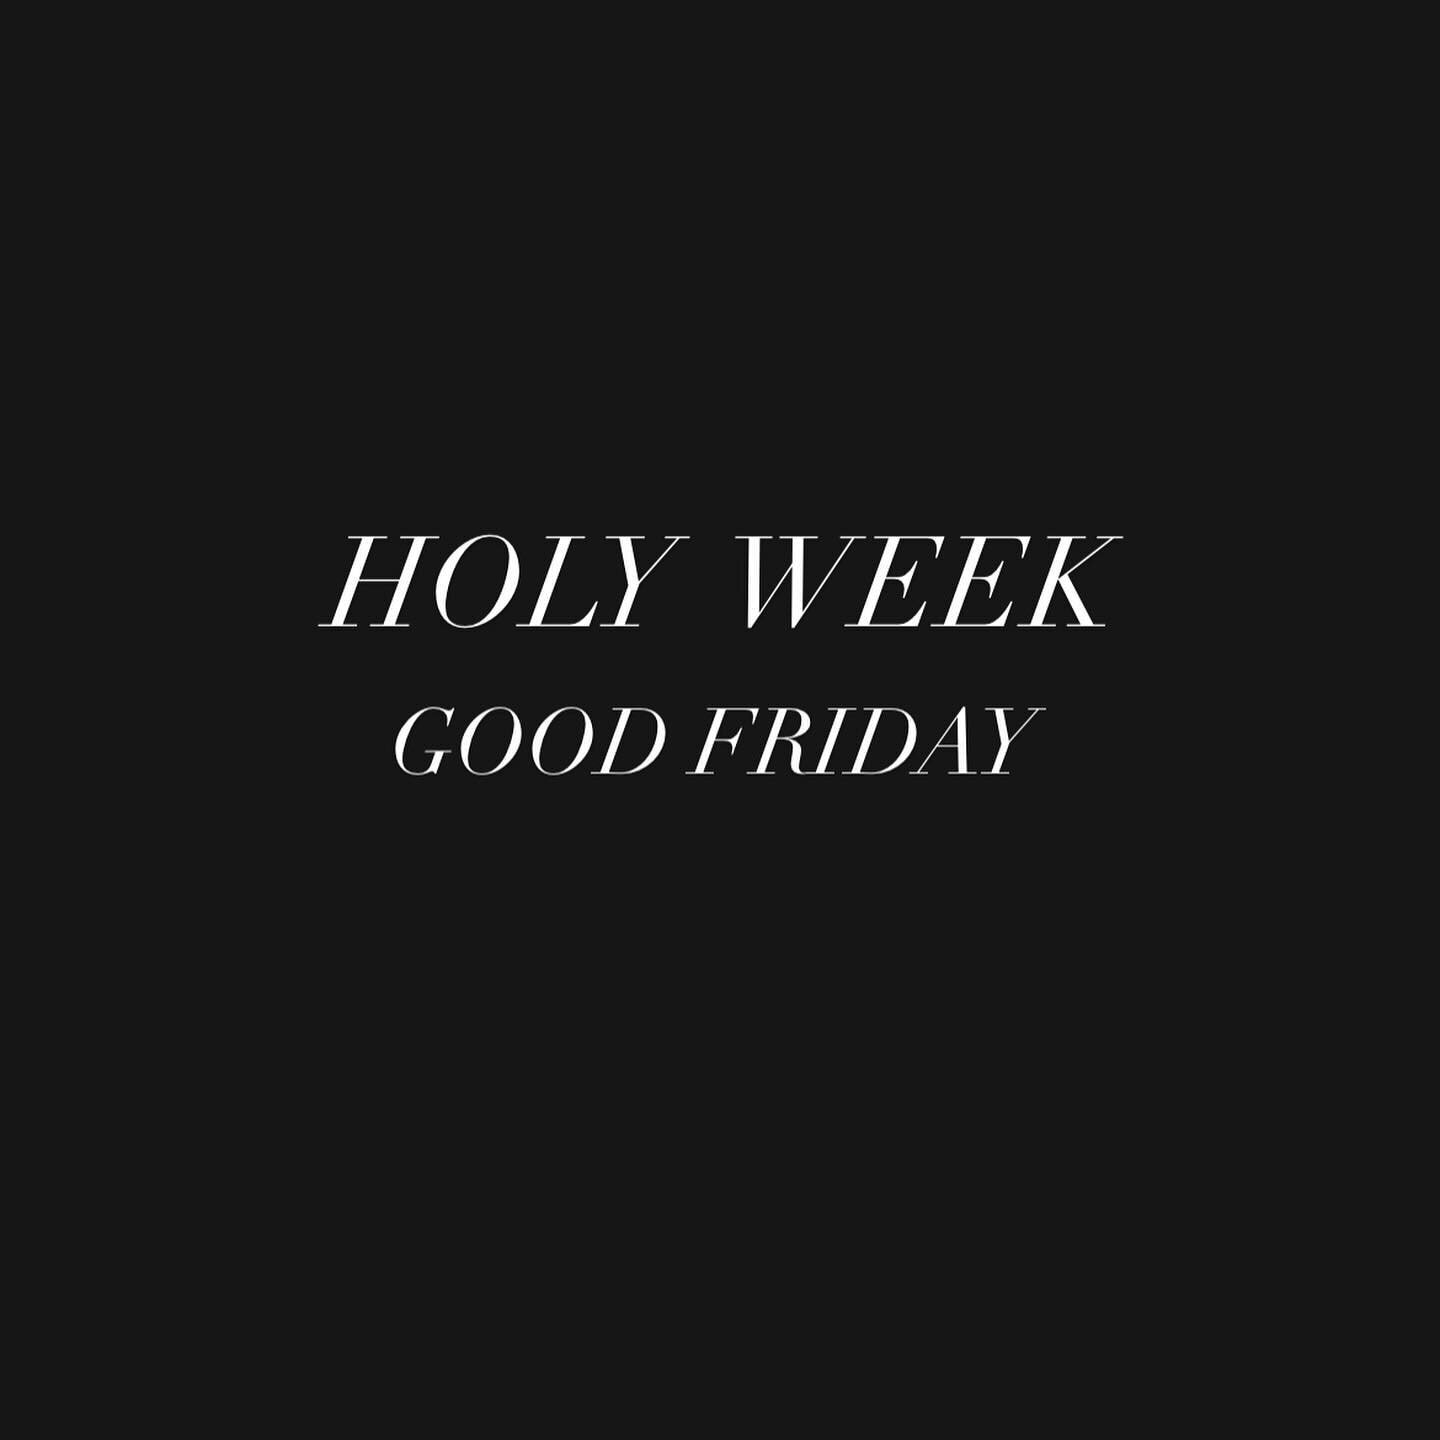 GOOD FRIDAY
__
Why do we call it &rsquo;Good&rsquo;?

Our good has been secured through the tragic suffering of the one who is truly good.
&mdash;
#holyweek #goodfriday #missiodei #missiophx